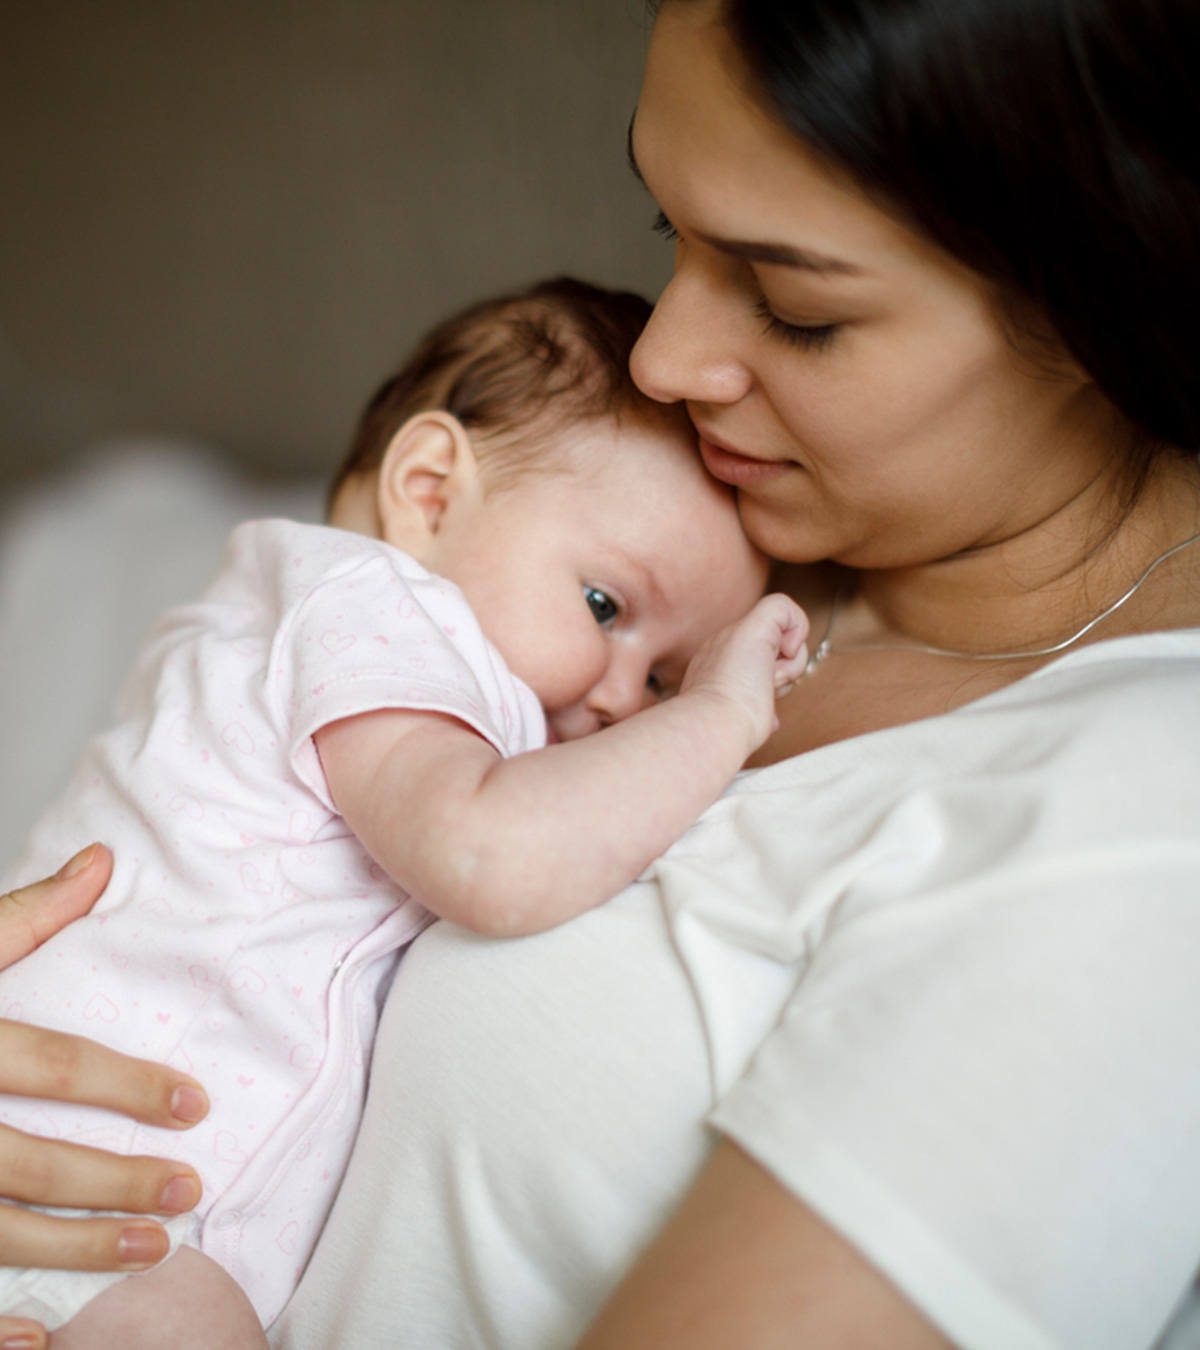 Common Emotional Problems In Parents With New Babies